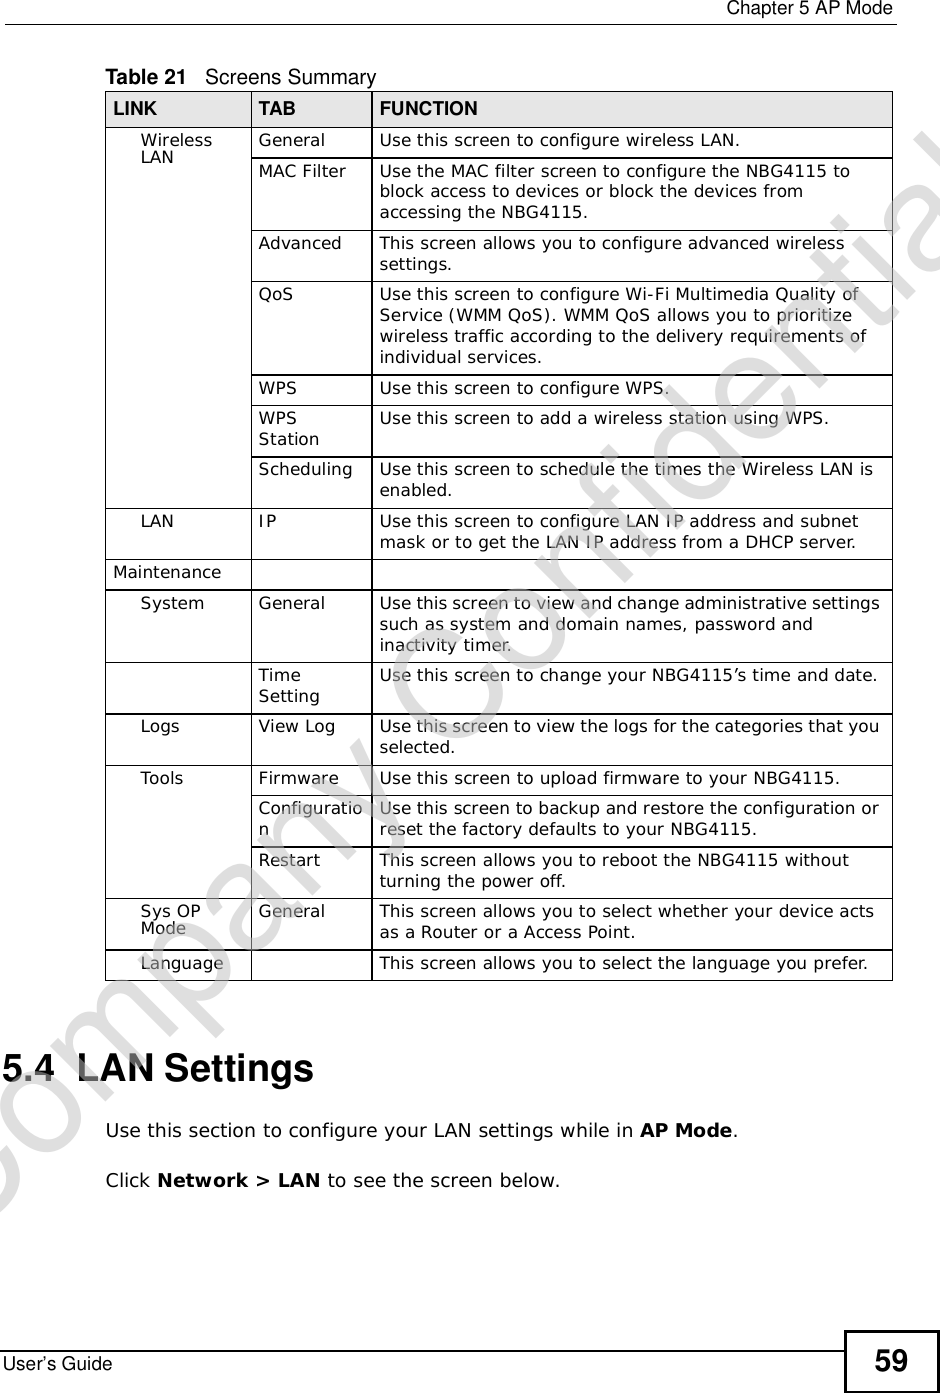  Chapter 5AP ModeUser’s Guide 595.4  LAN SettingsUse this section to configure your LAN settings while in AP Mode.Click Network &gt; LAN to see the screen below.WirelessLAN General Use this screen to configure wireless LAN.MAC Filter Use the MAC filter screen to configure the NBG4115 to block access to devices or block the devices from accessing the NBG4115.Advanced This screen allows you to configure advanced wireless settings.QoS Use this screen to configure Wi-Fi Multimedia Quality of Service (WMM QoS). WMM QoS allows you to prioritize wireless traffic according to the delivery requirements of individual services.WPS Use this screen to configure WPS.WPS Station Use this screen to add a wireless station using WPS.Scheduling Use this screen to schedule the times the Wireless LAN is enabled.LAN IP Use this screen to configure LAN IP address and subnet mask or to get the LAN IP address from a DHCP server.MaintenanceSystem General Use this screen to view and change administrative settings such as system and domain names, password and inactivity timer.Time Setting Use this screen to change your NBG4115’s time and date.Logs View Log Use this screen to view the logs for the categories that you selected.Tools Firmware Use this screen to upload firmware to your NBG4115.ConfigurationUse this screen to backup and restore the configuration or reset the factory defaults to your NBG4115. Restart This screen allows you to reboot the NBG4115 without turning the power off.Sys OP Mode General This screen allows you to select whether your device acts as a Router or a Access Point.Language This screen allows you to select the language you prefer.Table 21   Screens SummaryLINK TAB FUNCTIONCompany Confidential